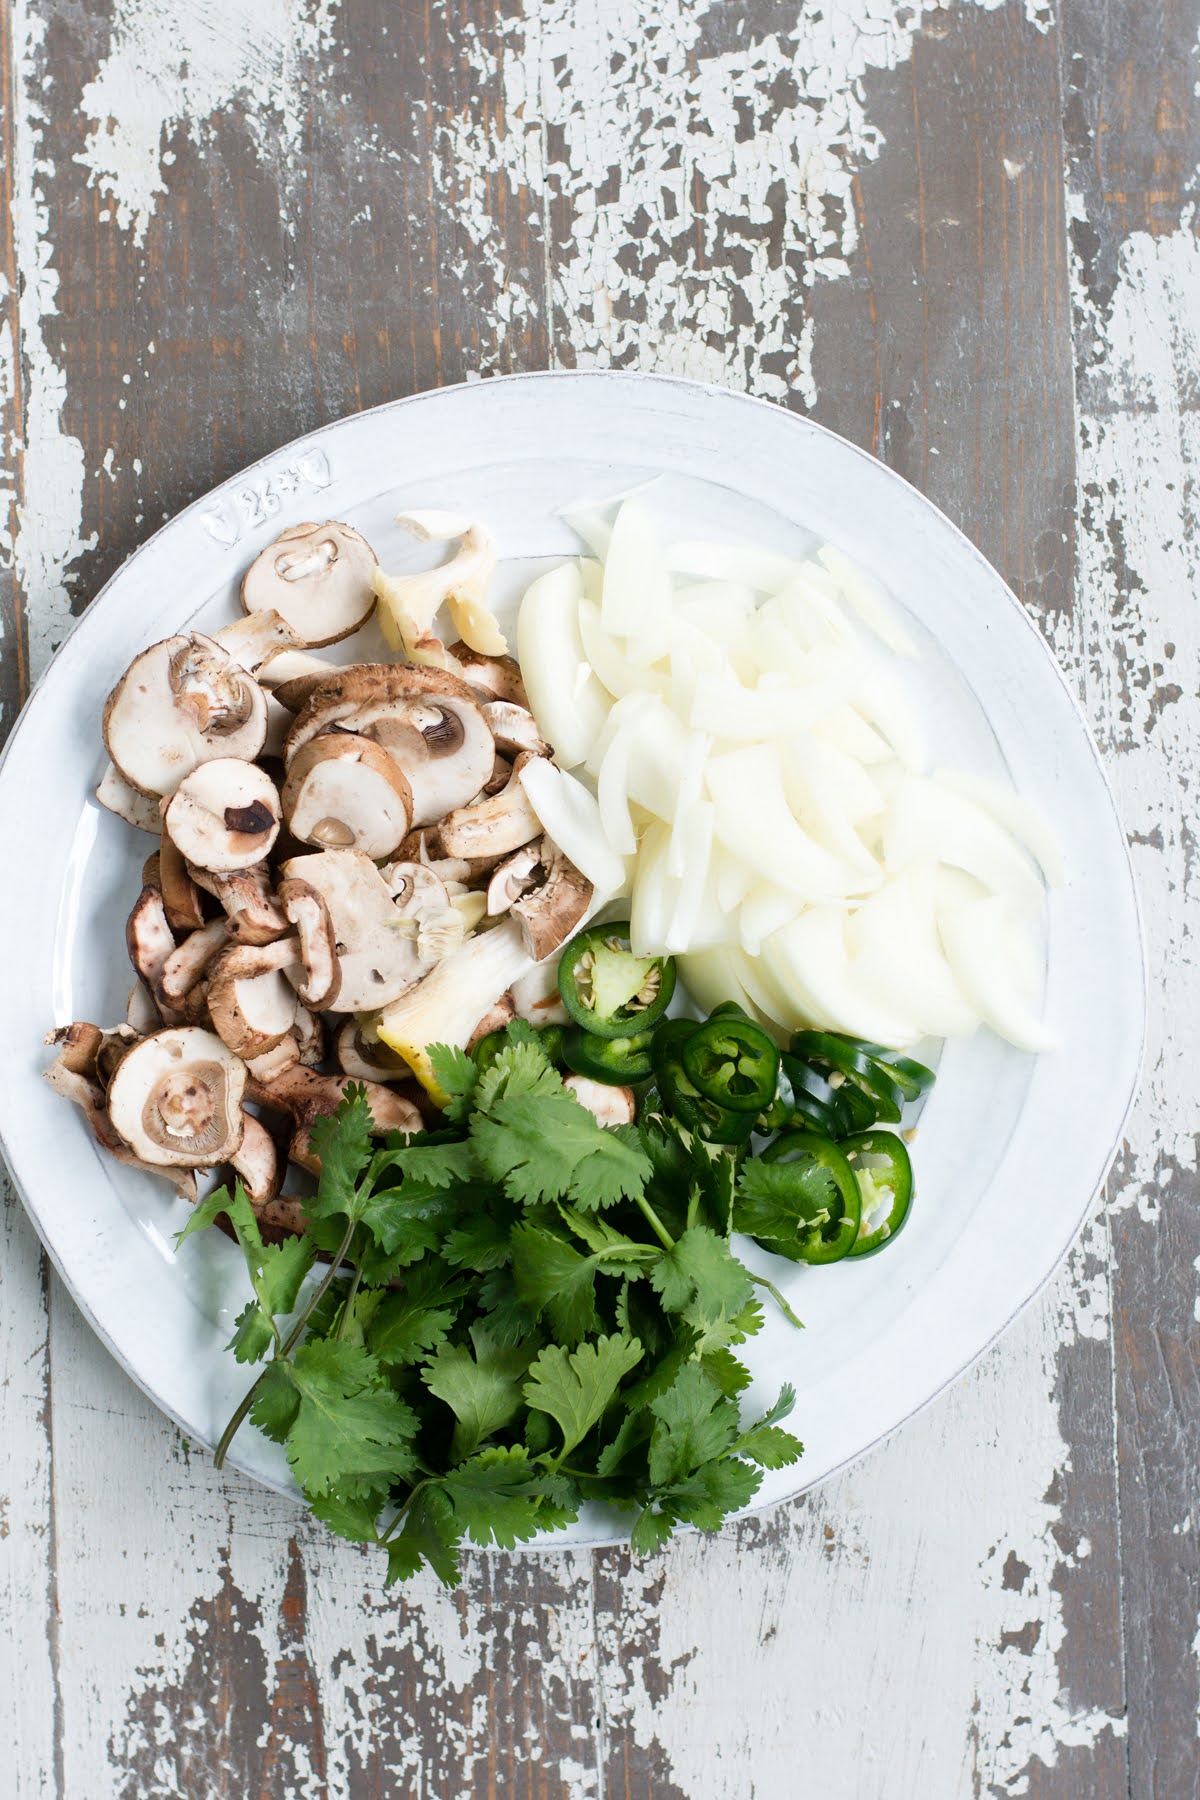 Onions, mushrooms, chilis, and cilantro on a plate.